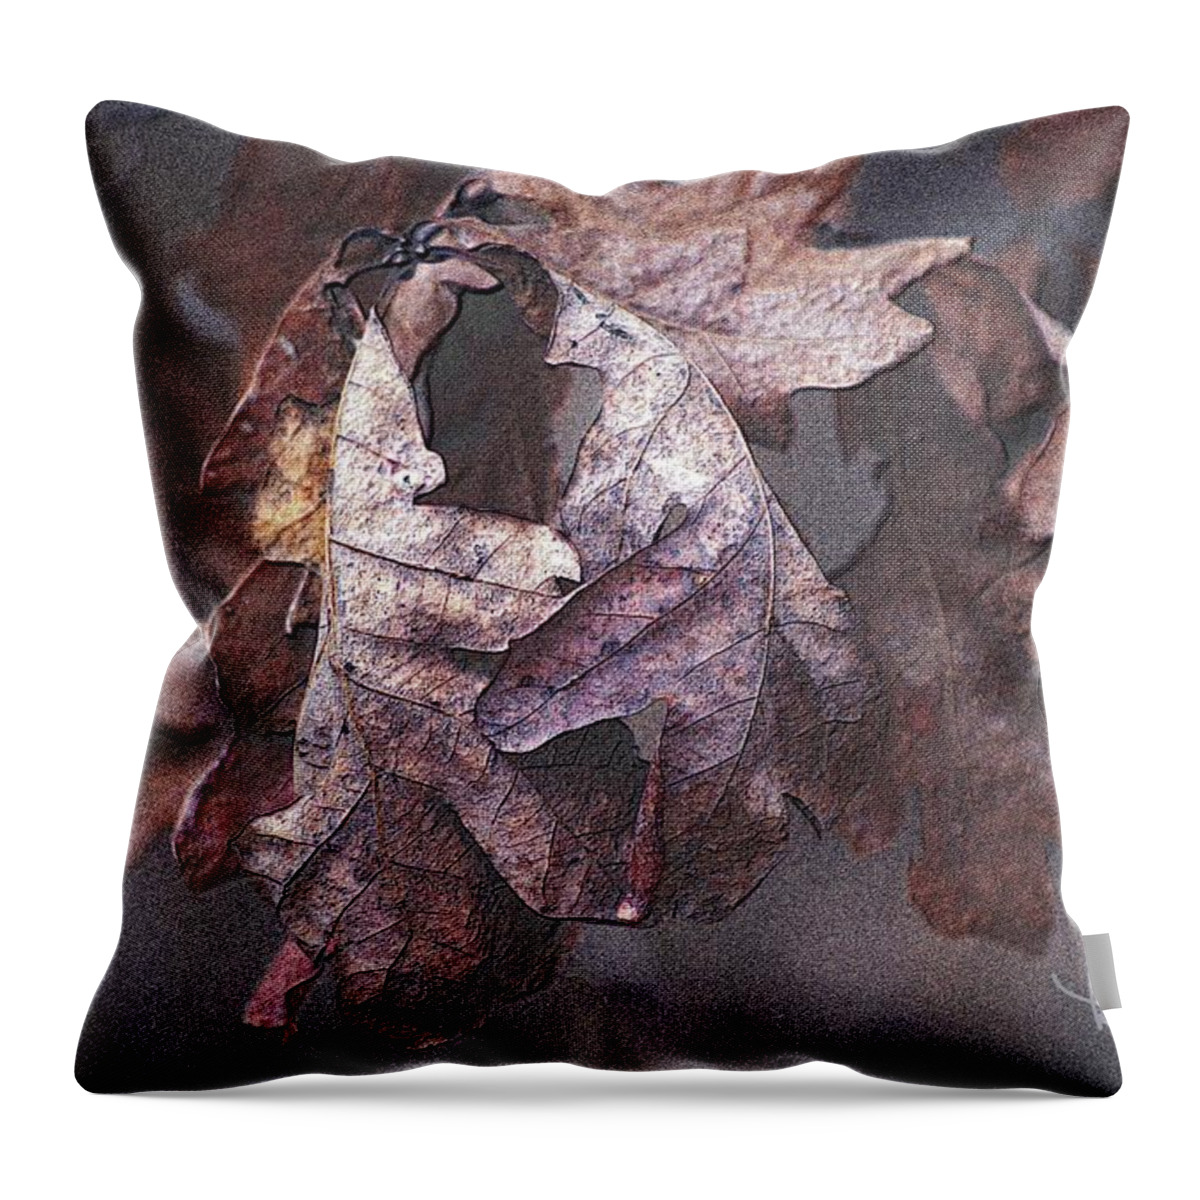 Abstract Throw Pillow featuring the photograph Oak Leaves by Ludwig Keck